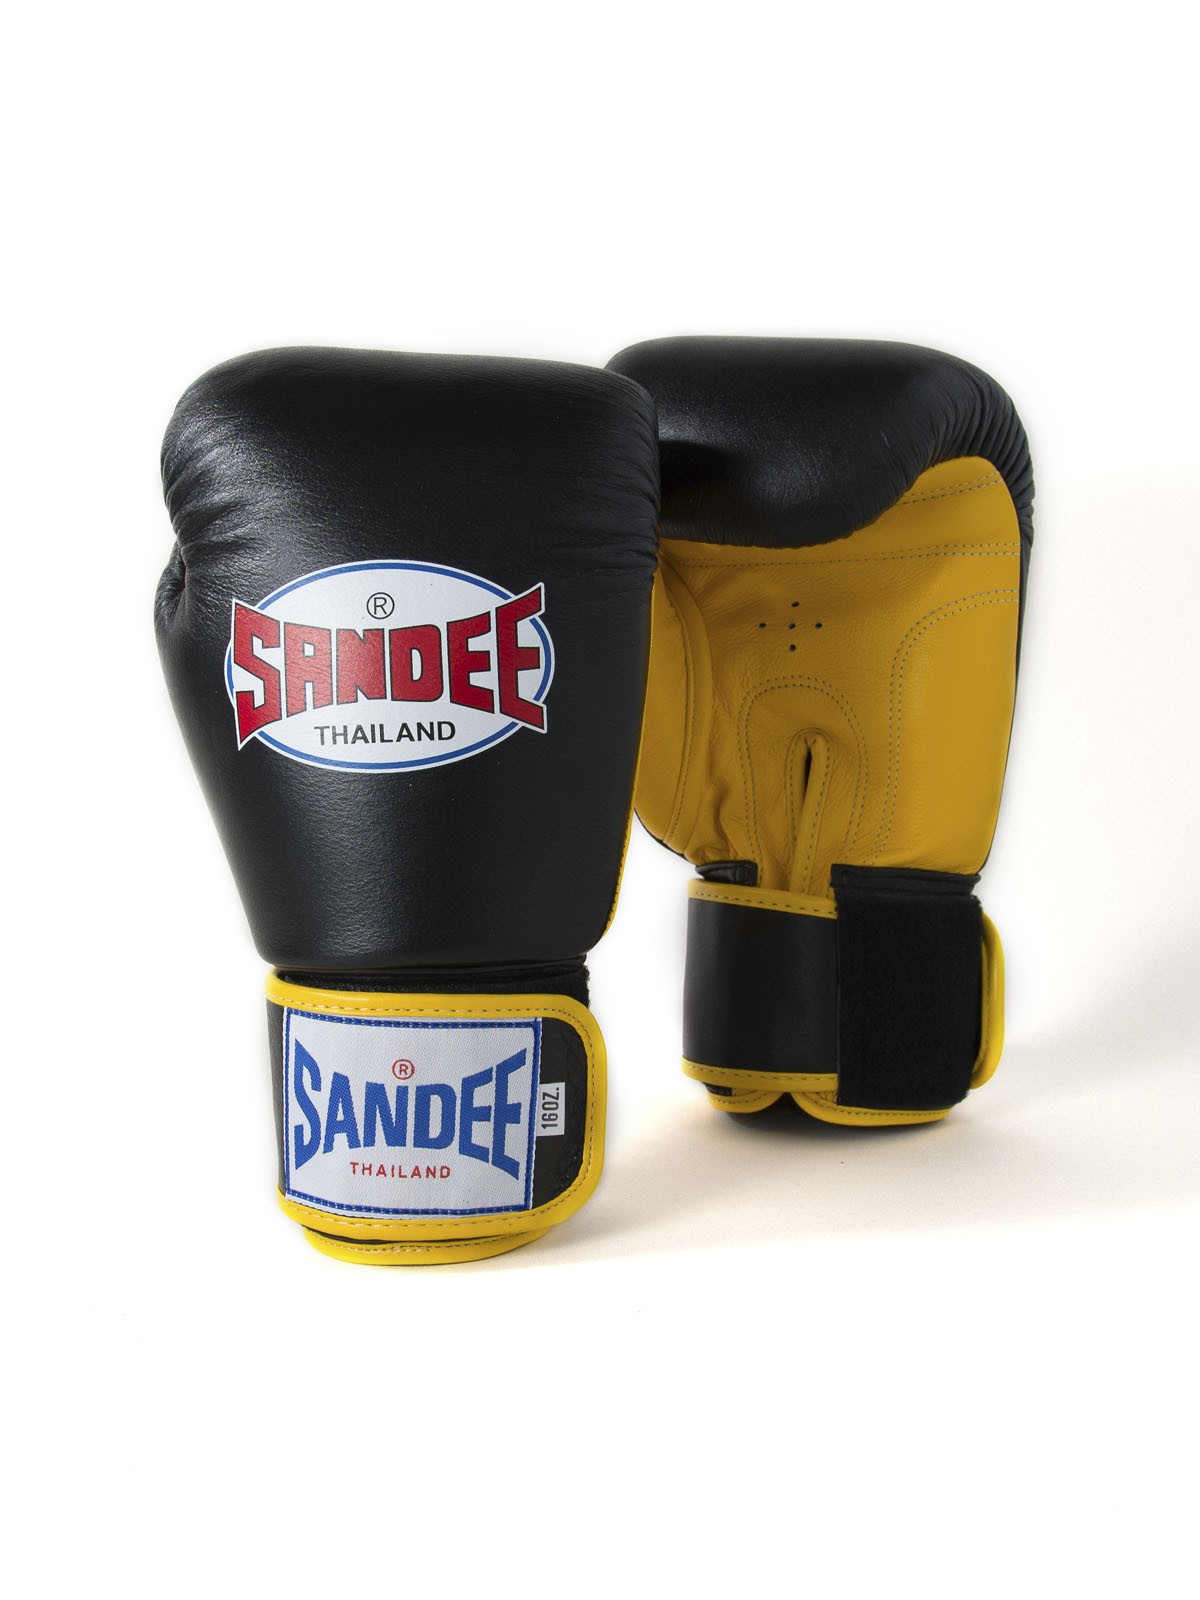 Details about   Sandee Boxing Gloves Authentic Leather Black Yellow Muay Thai Kickboxing MMA